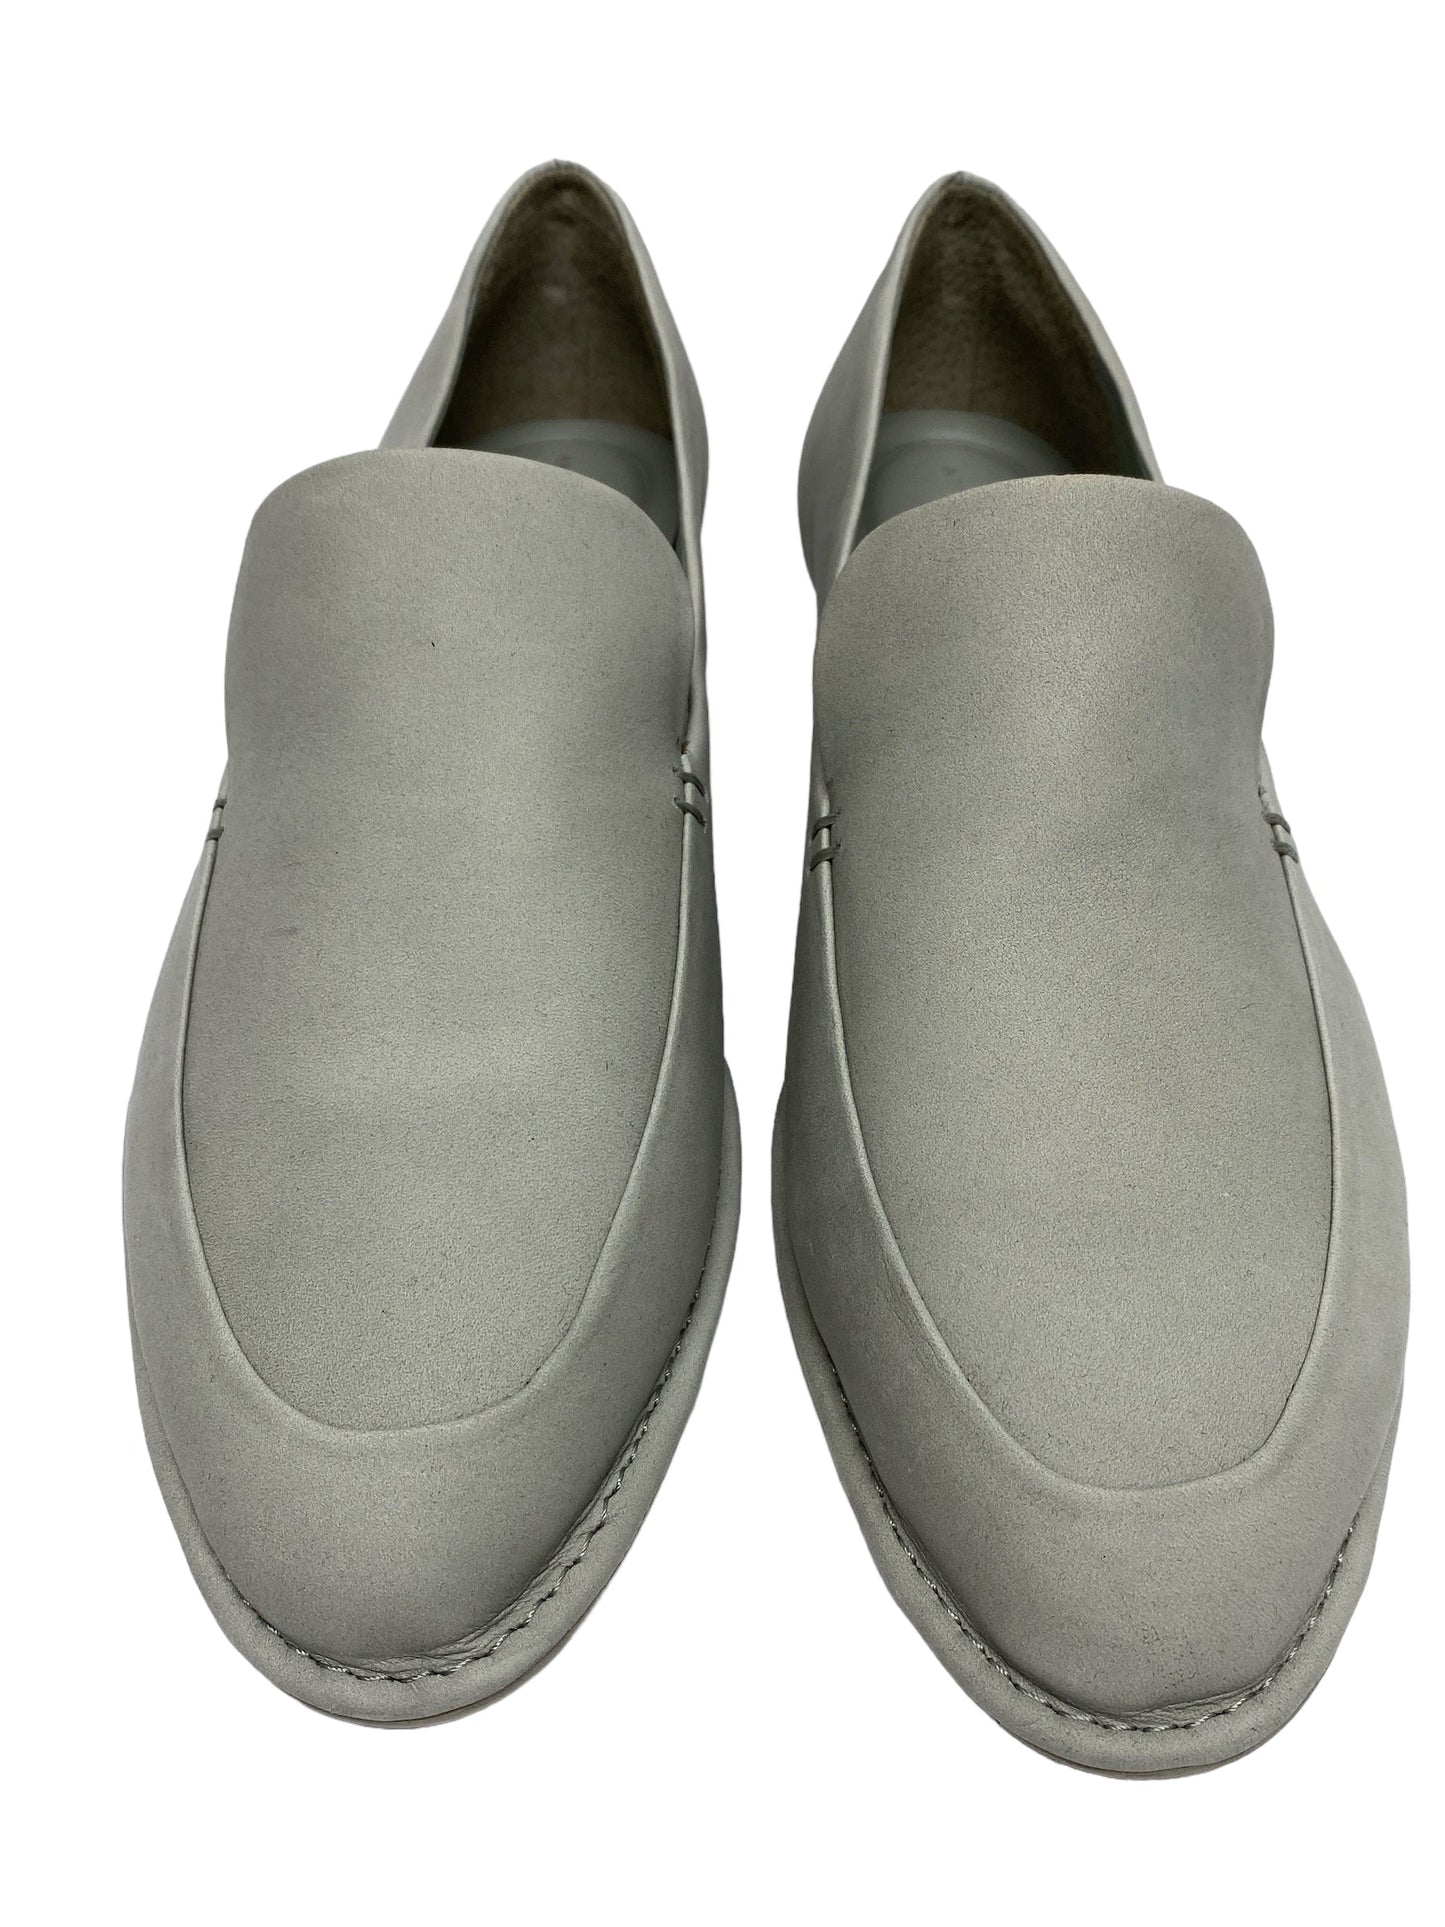 Shoes Flats Loafer Oxford By Antonio Melani  Size: 8.5